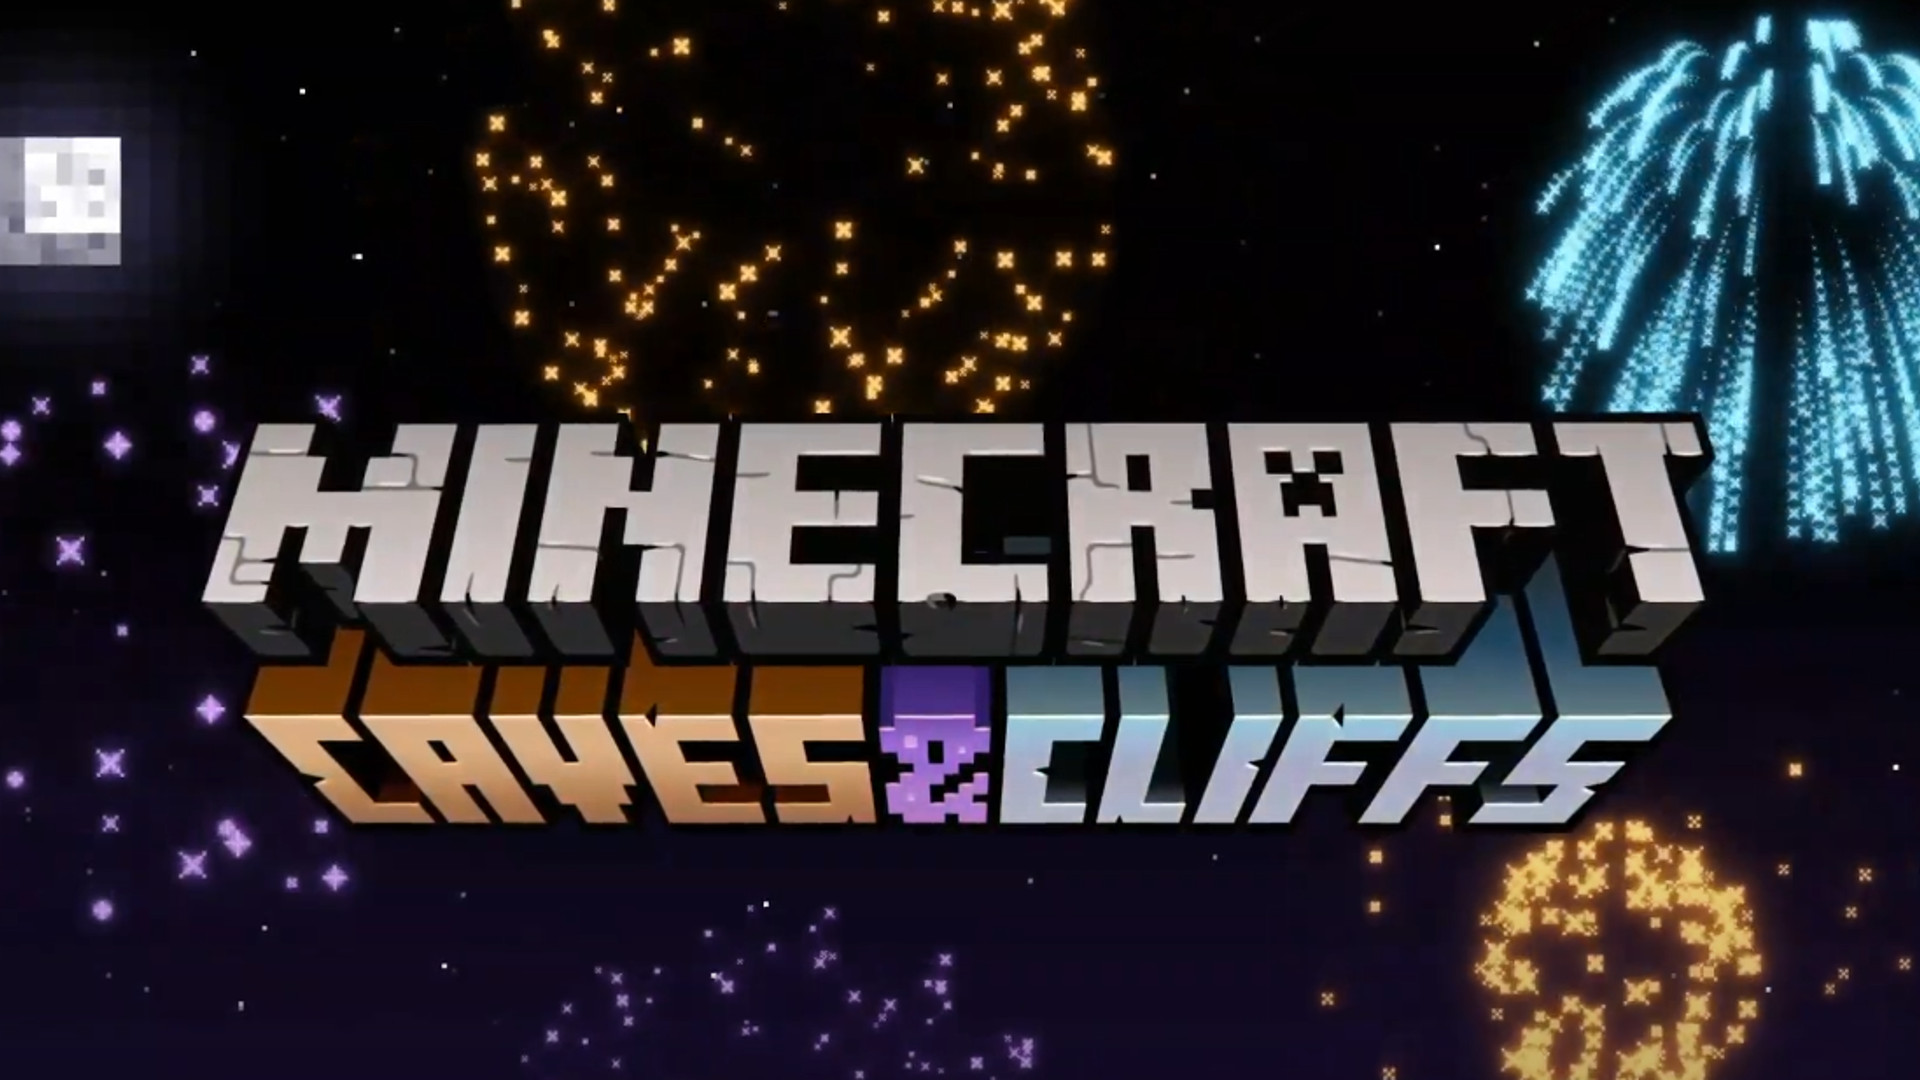 Minecraft Snapshot 20w48a Adds Dripstone, Stalagmites And Stalactites, As Part Of The Caves & Cliffs Update